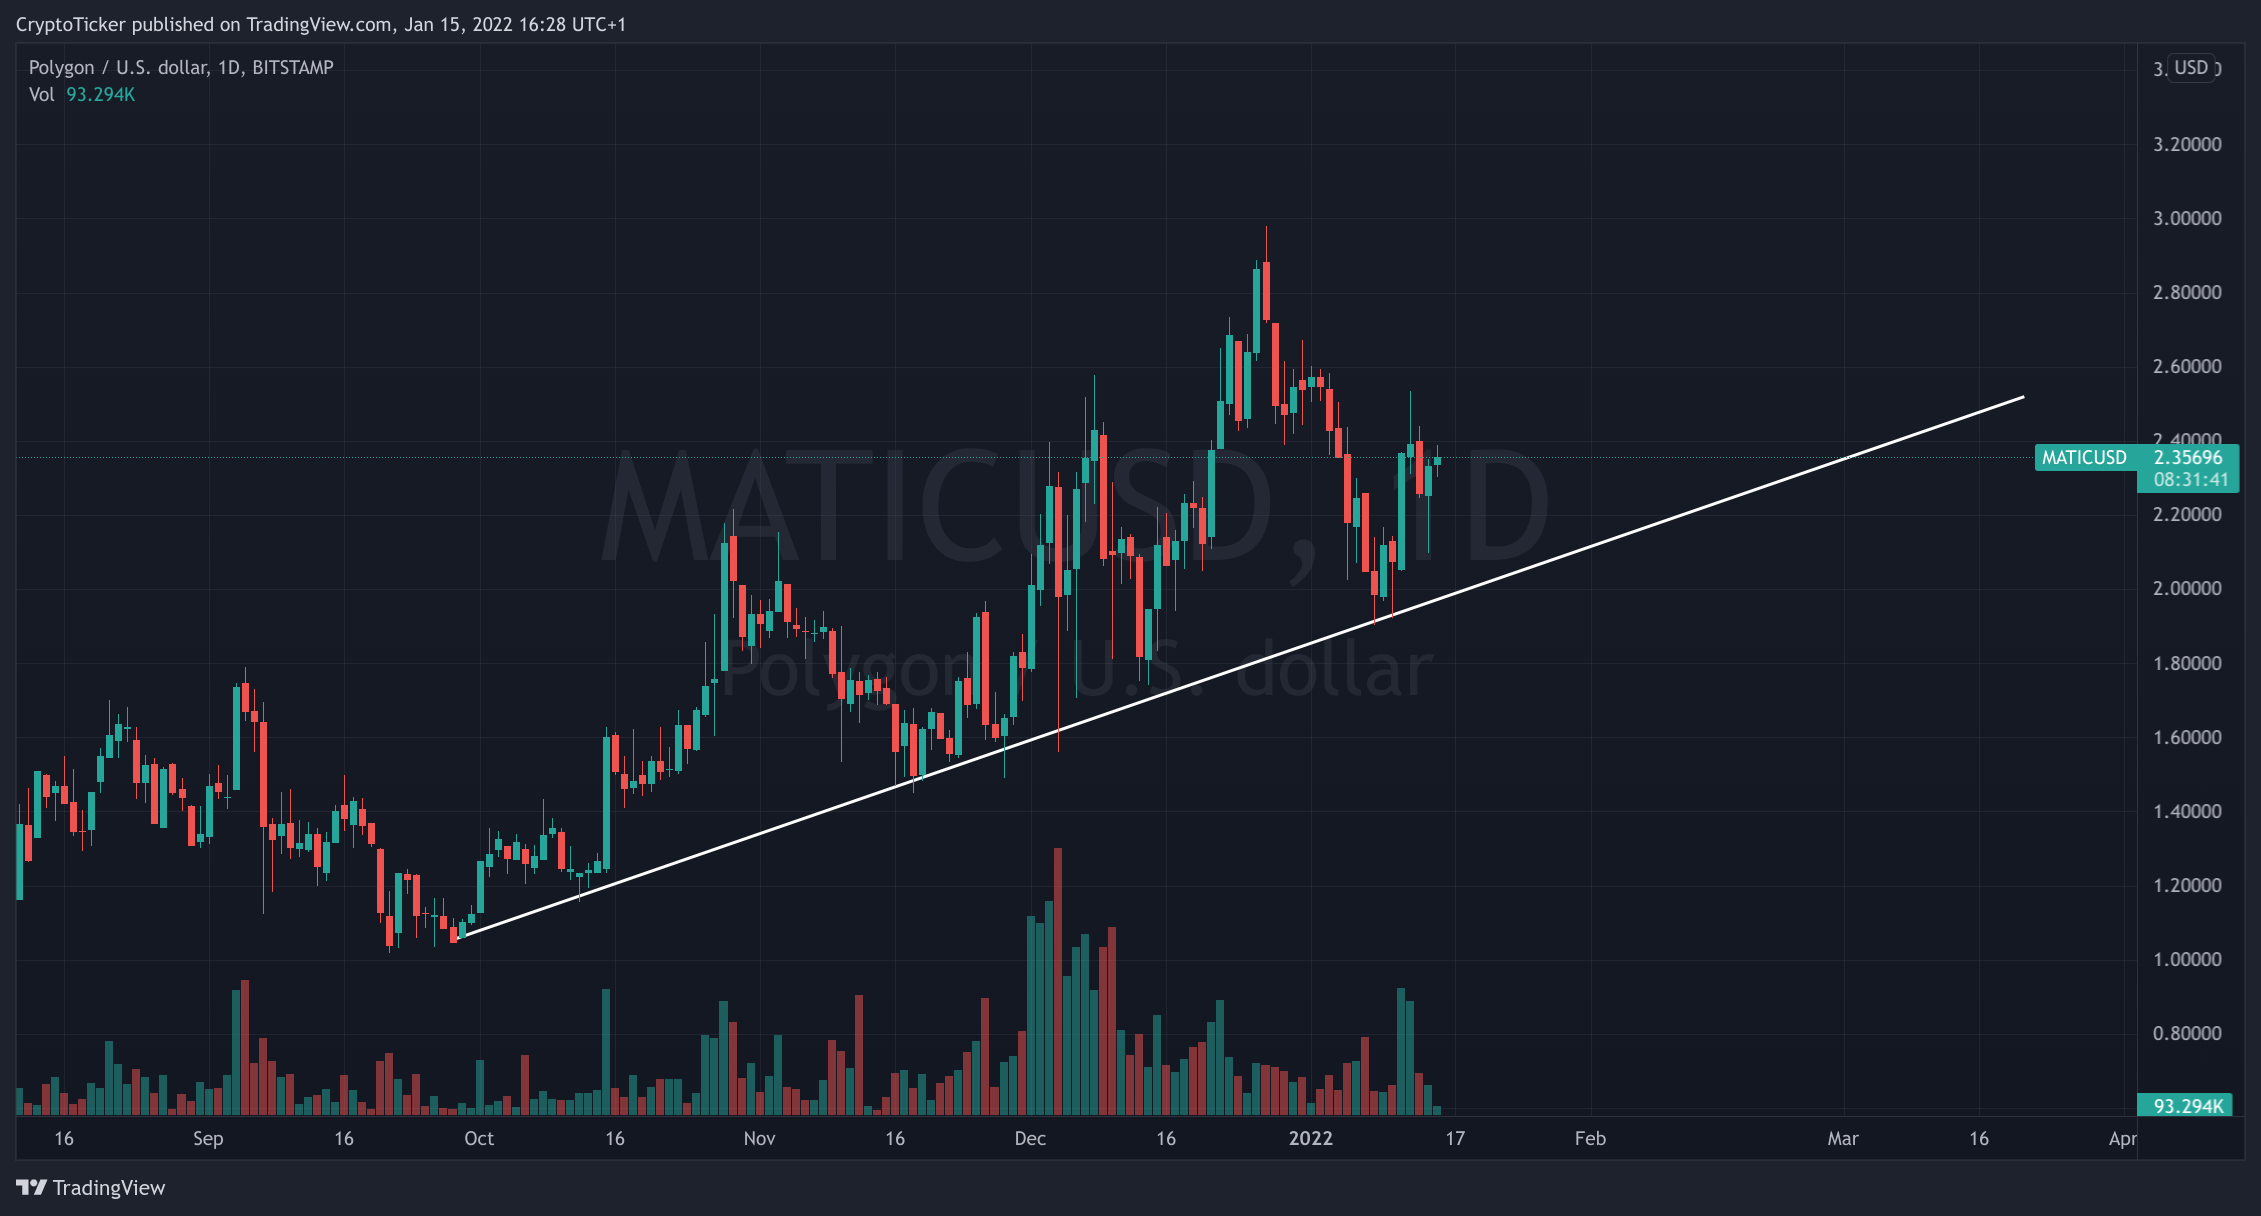 Web3 tokens - MATIC/USD 1-day chart showing MATIC's uptrend